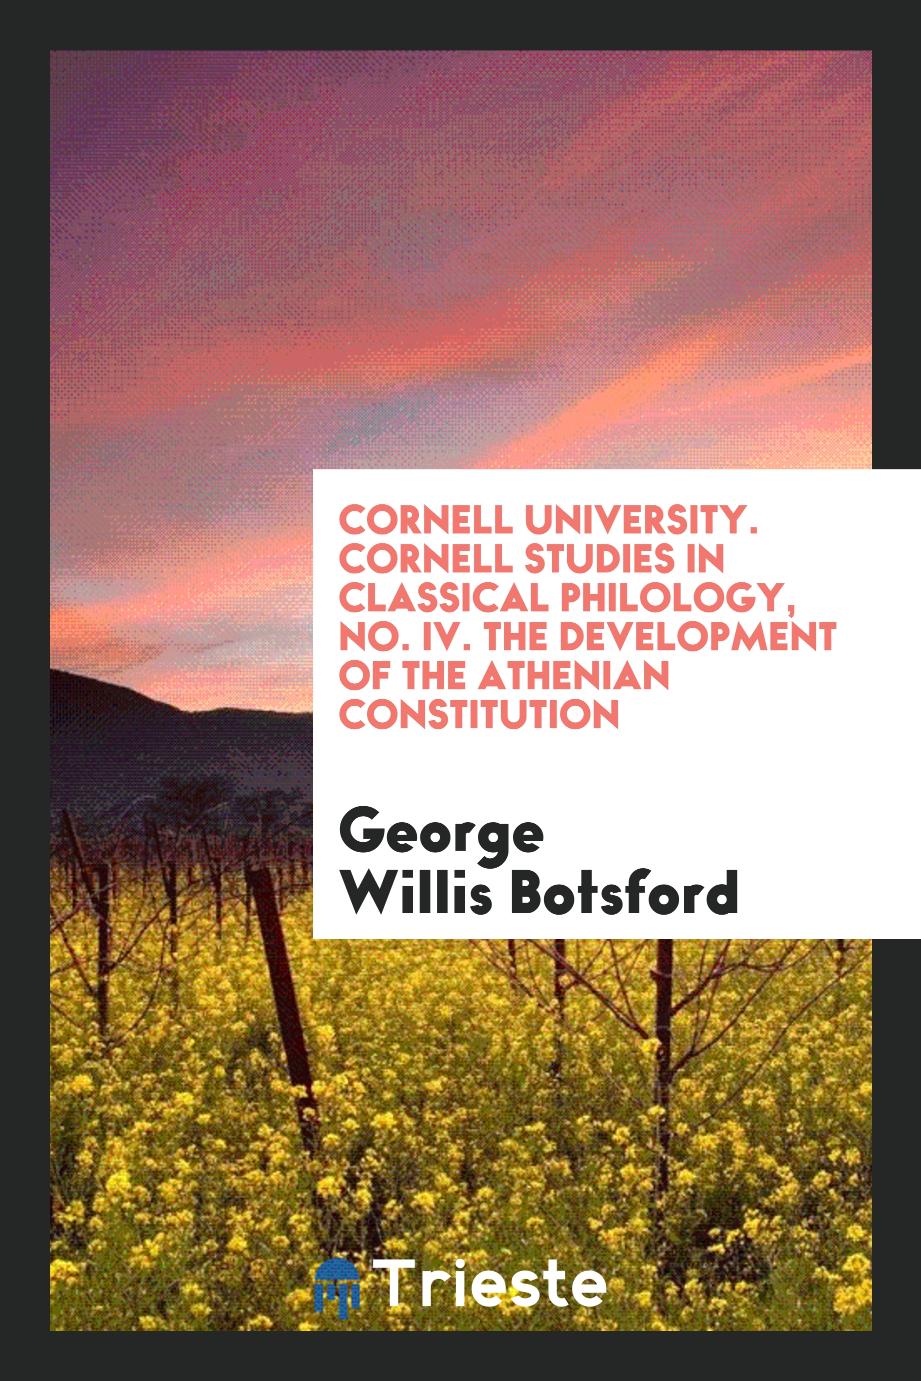 Cornell University. Cornell Studies in Classical Philology, No. IV. The Development of the Athenian Constitution